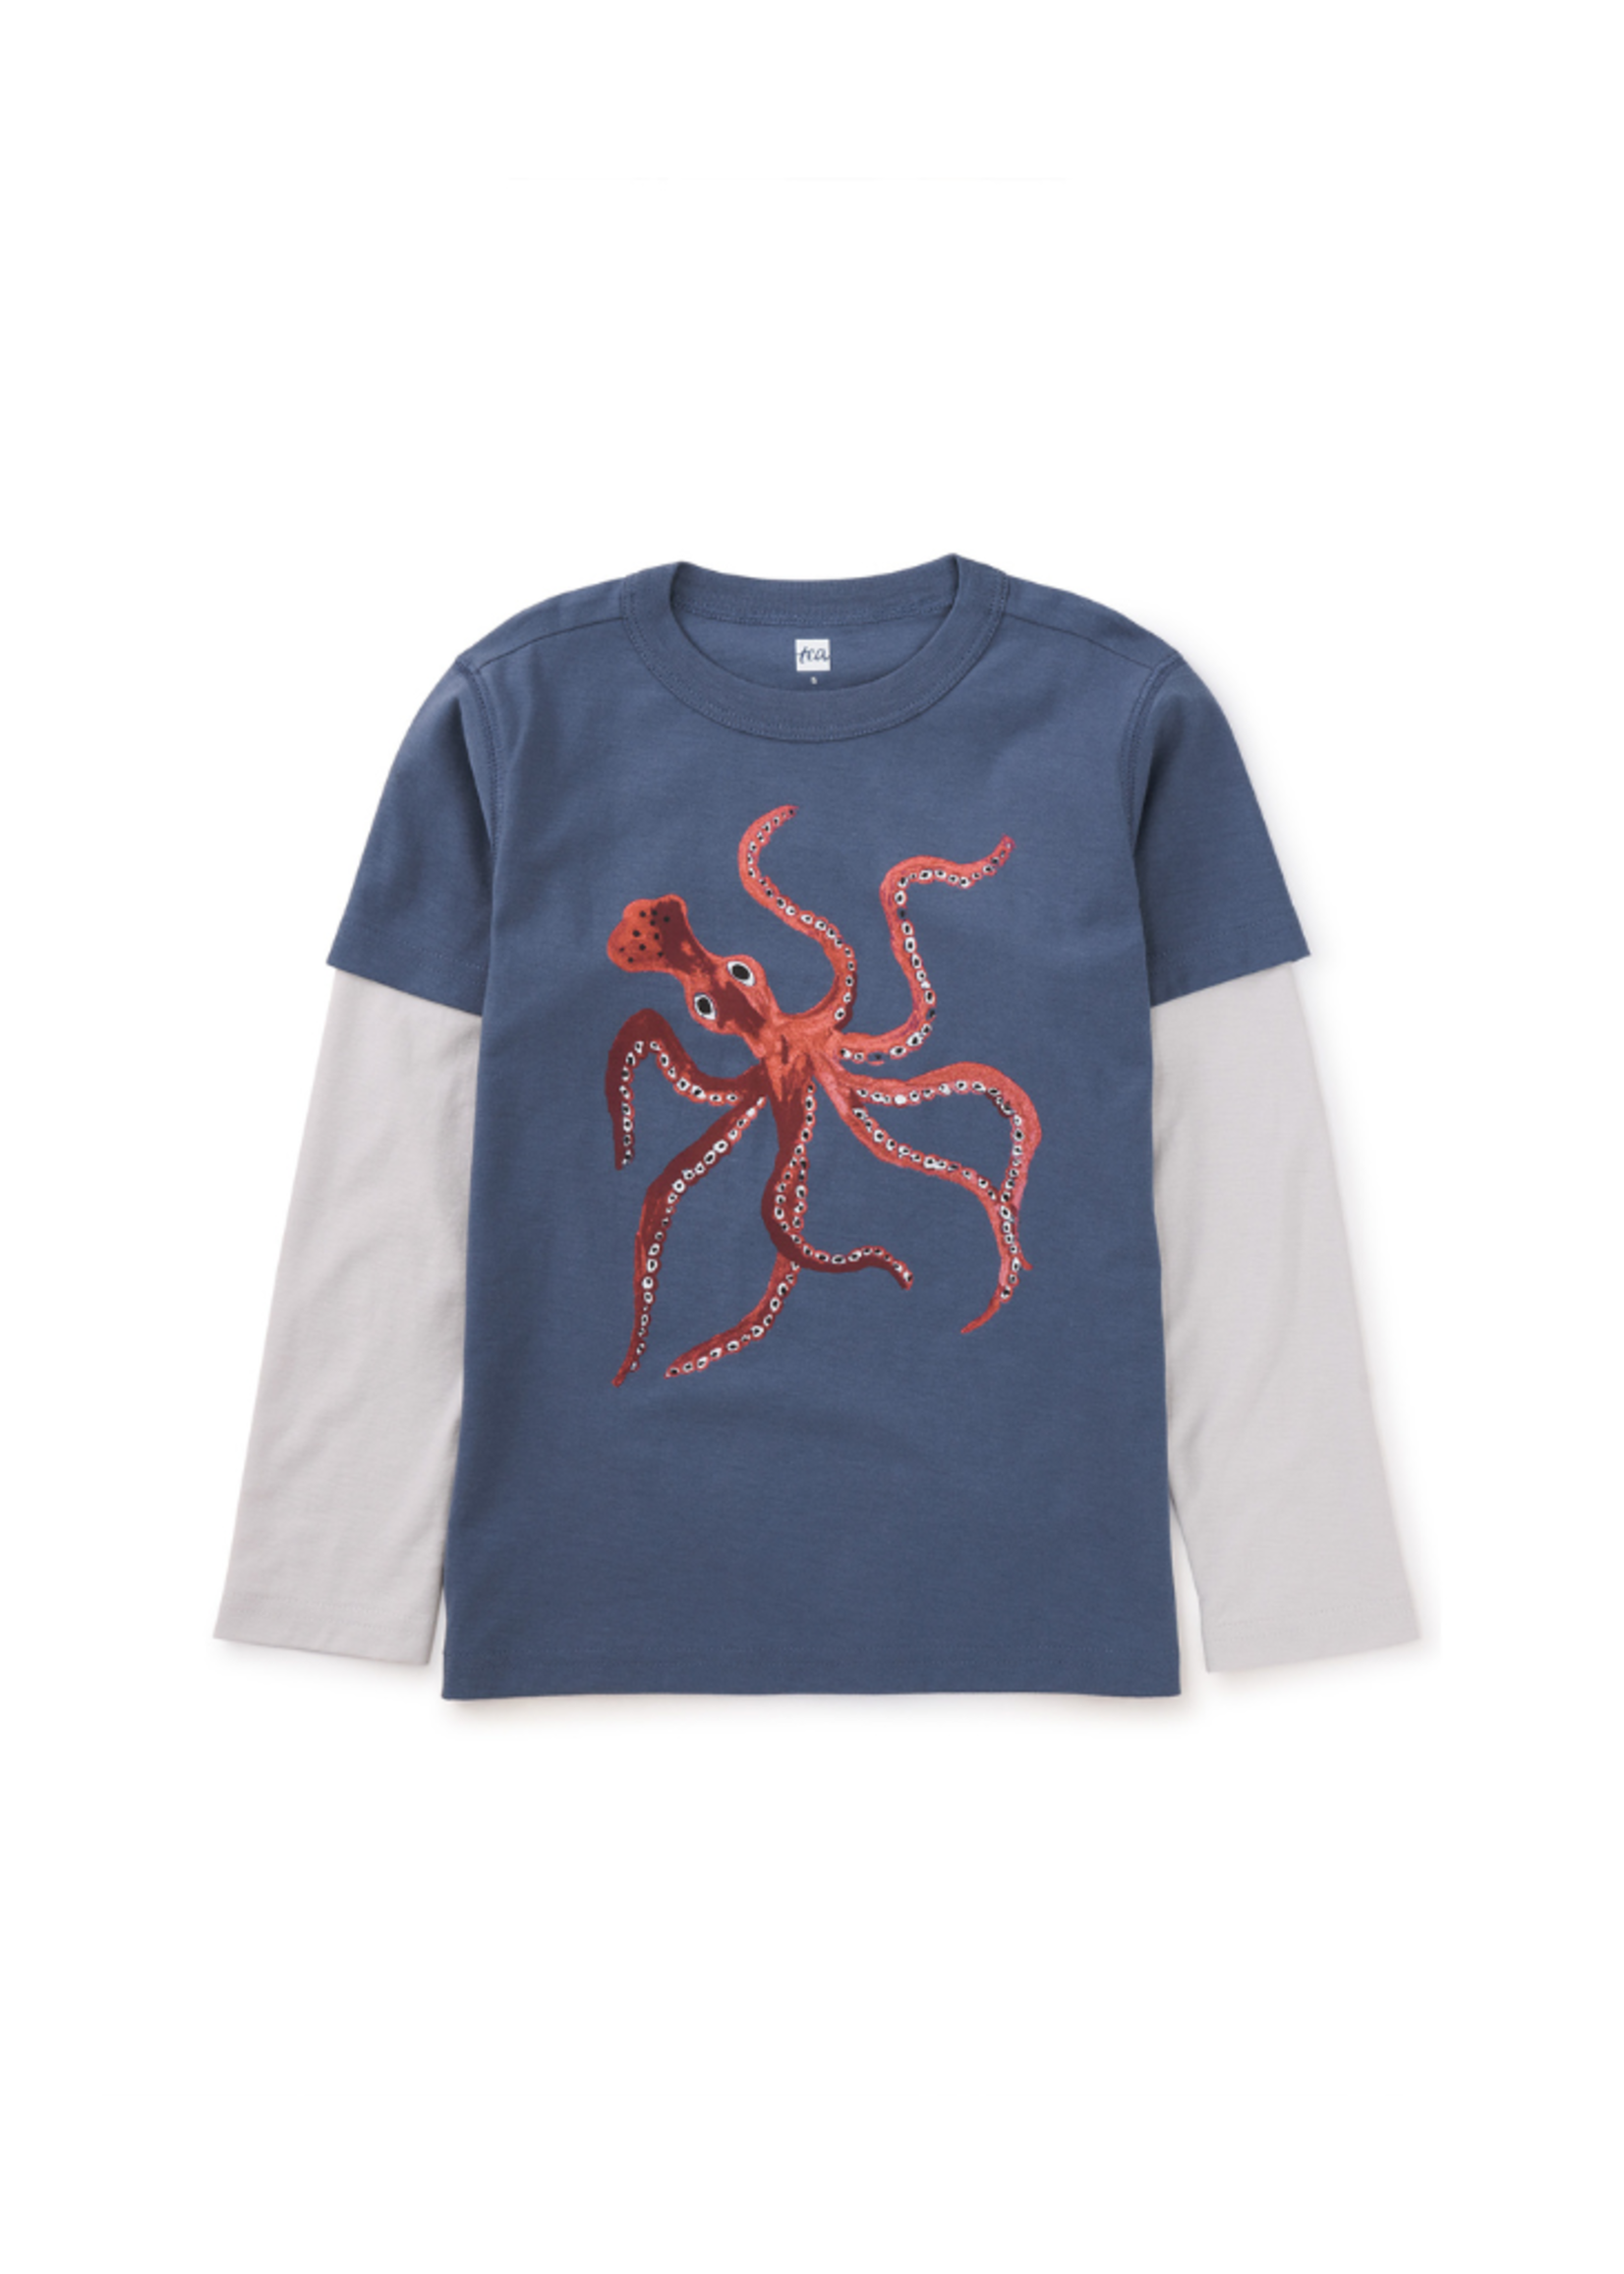 Tea Collection Octo Layer Sleeve Graphic Tee